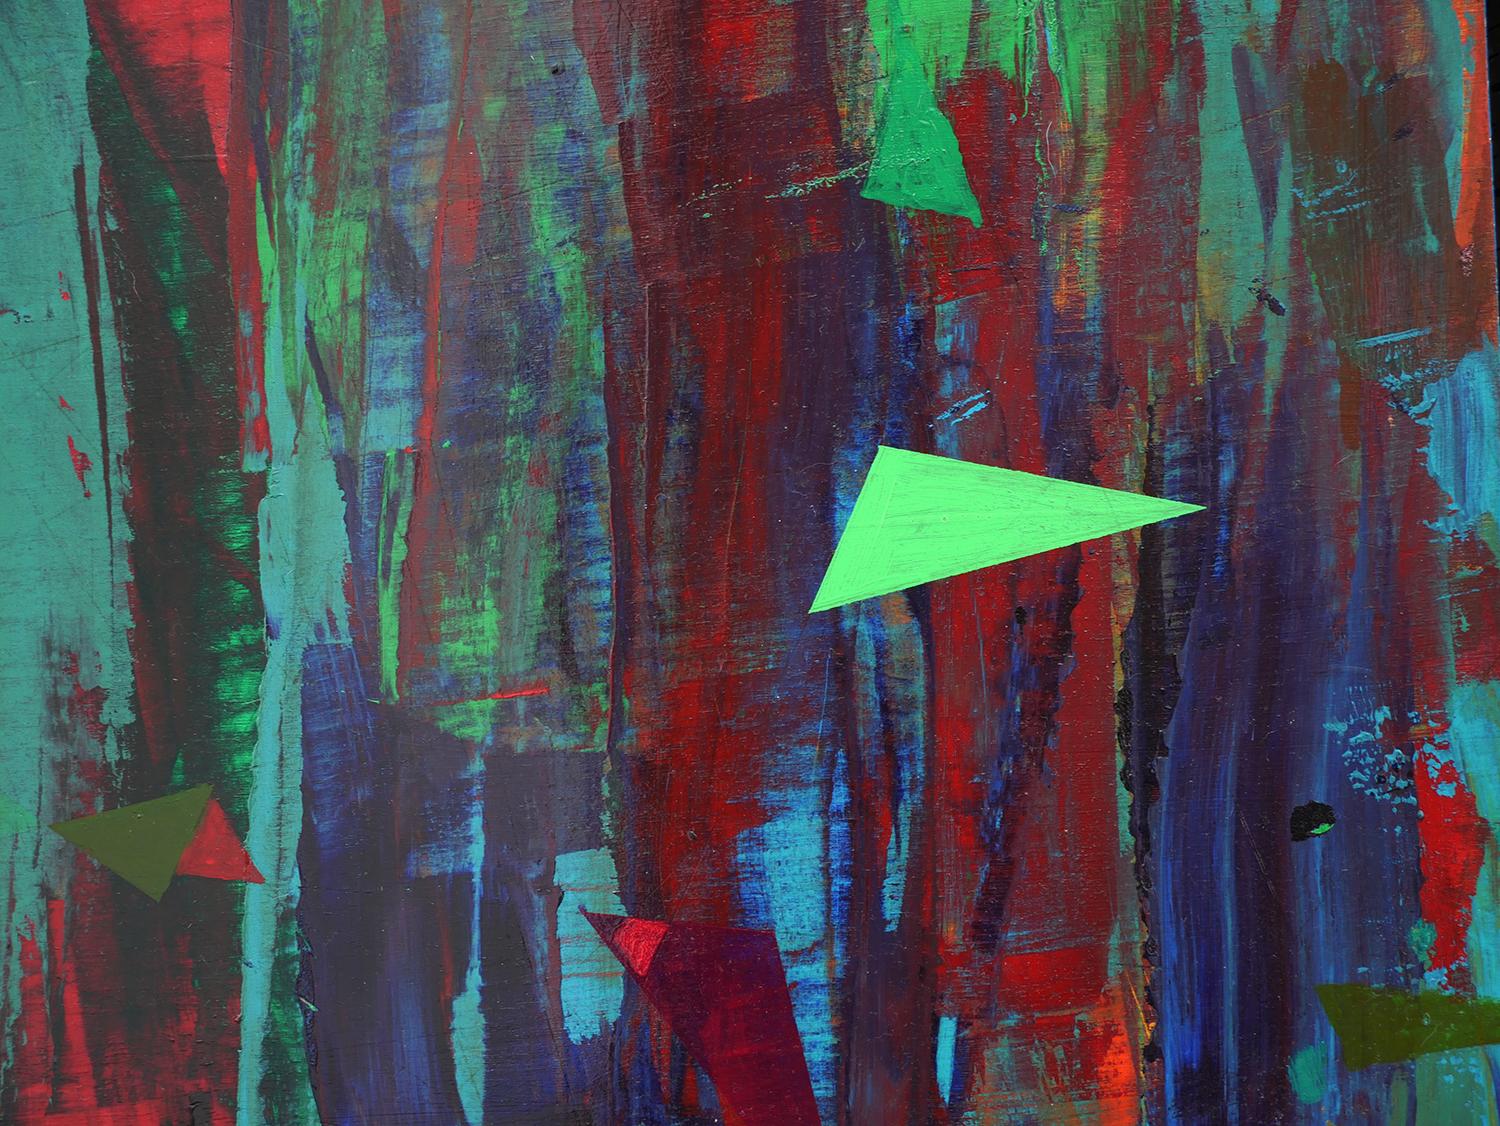 Contemporary Expressionist Painting with Geometric Shapes 5